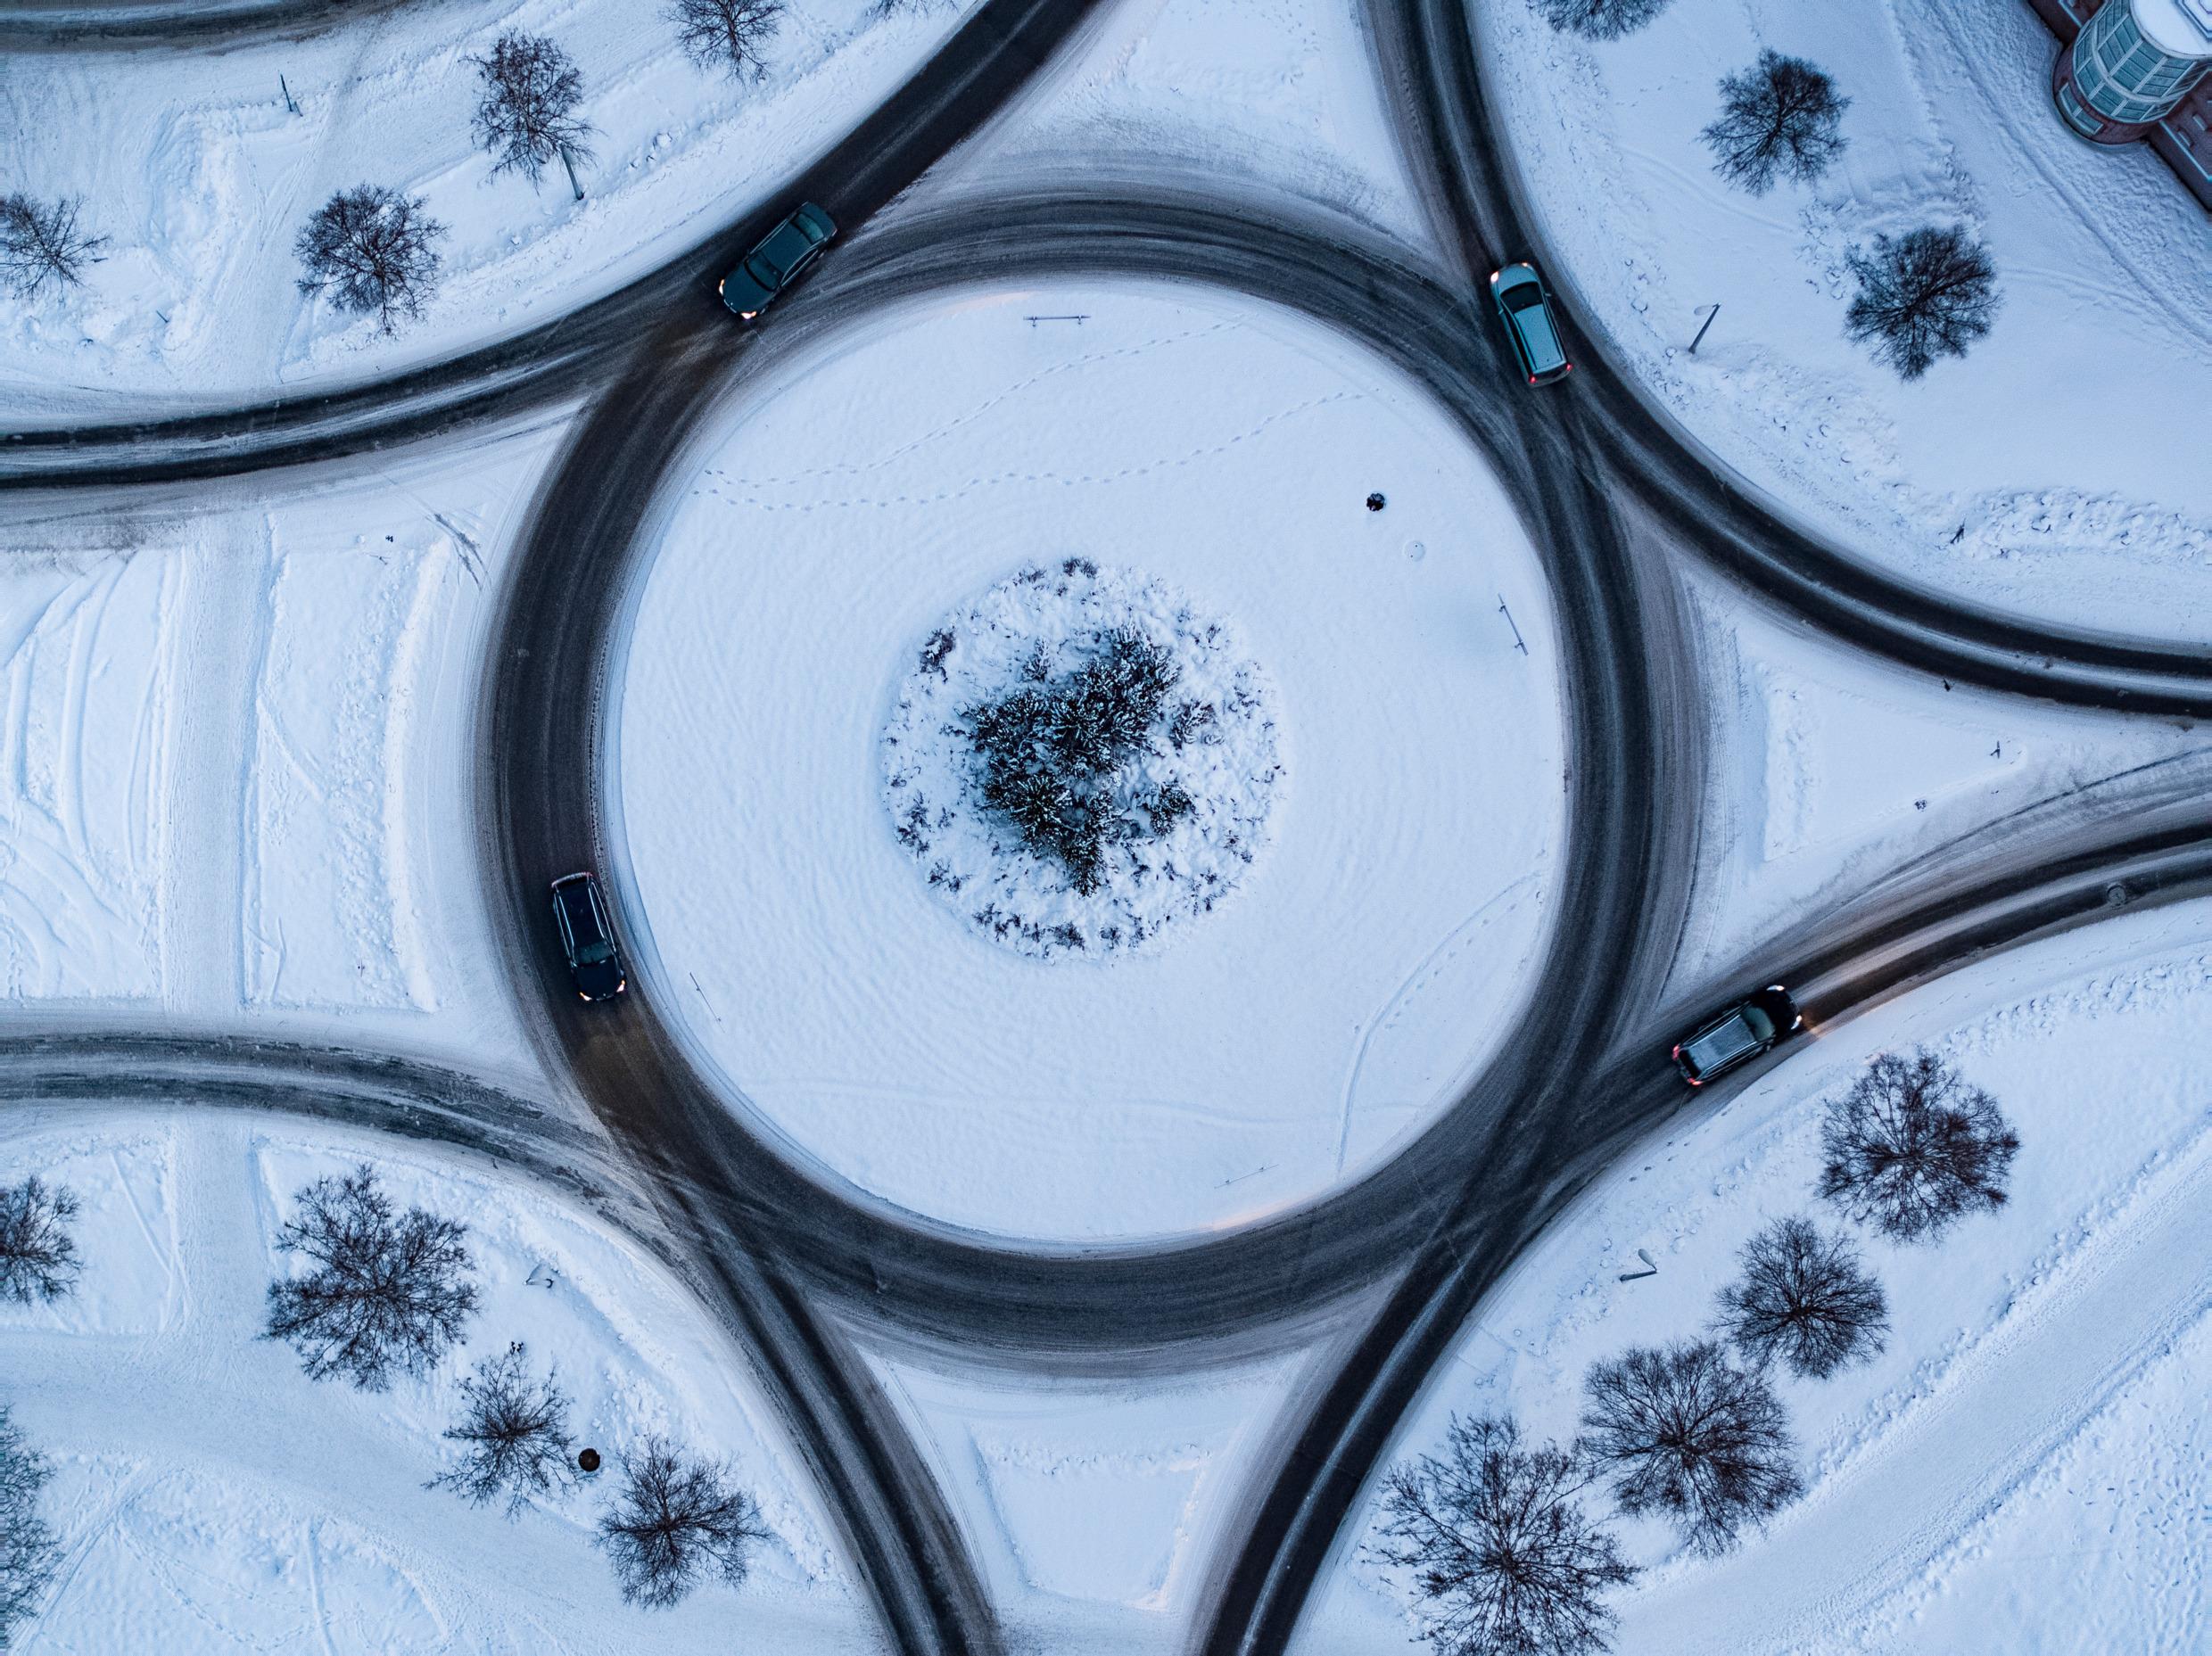 A traffic roundabout seen from above during a snowy winter.